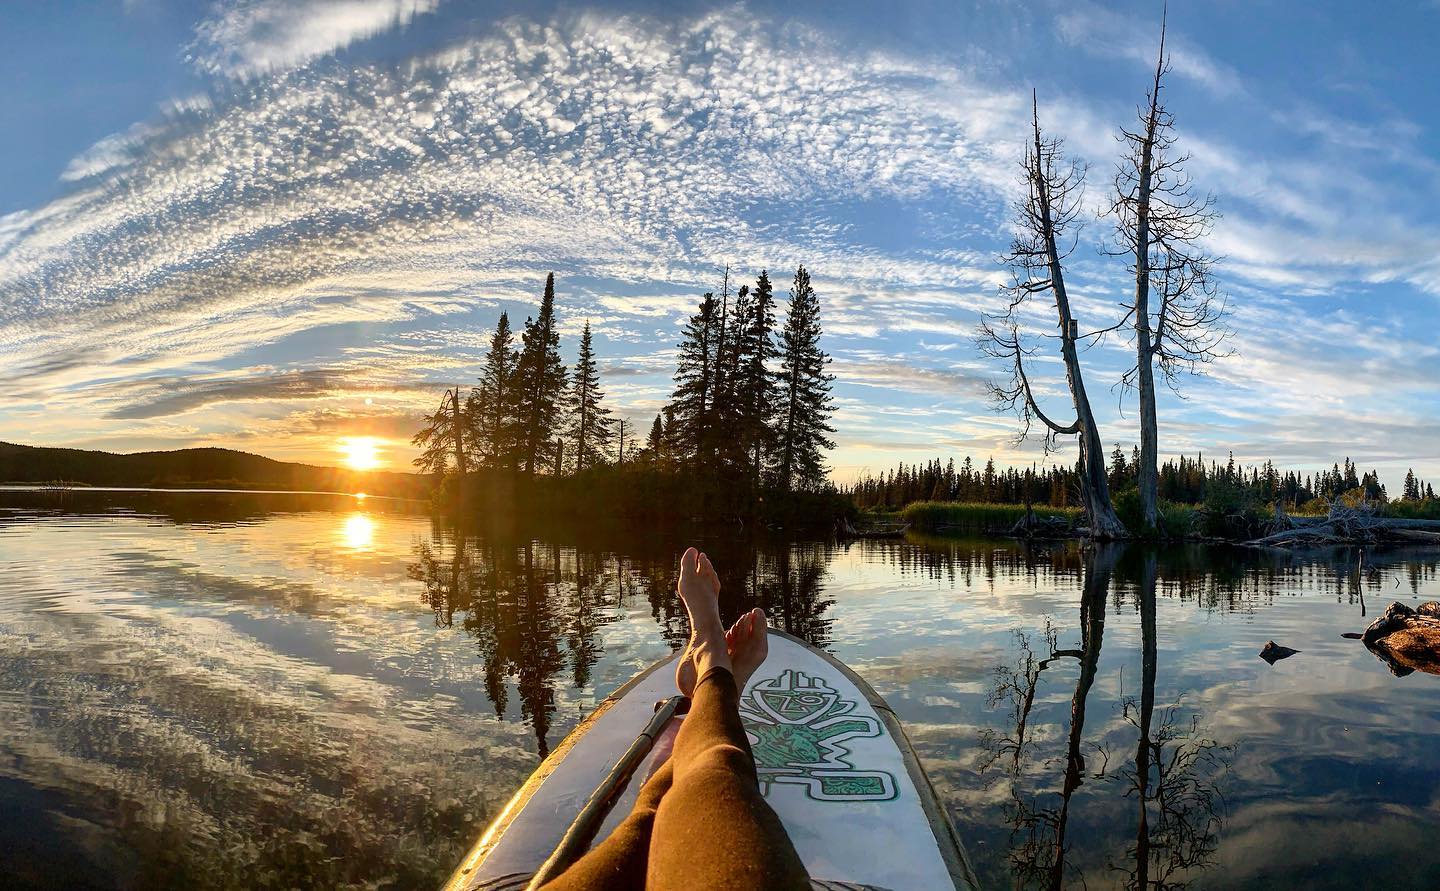 Legs relaxing on paddleboard pointing towards sunset on lake